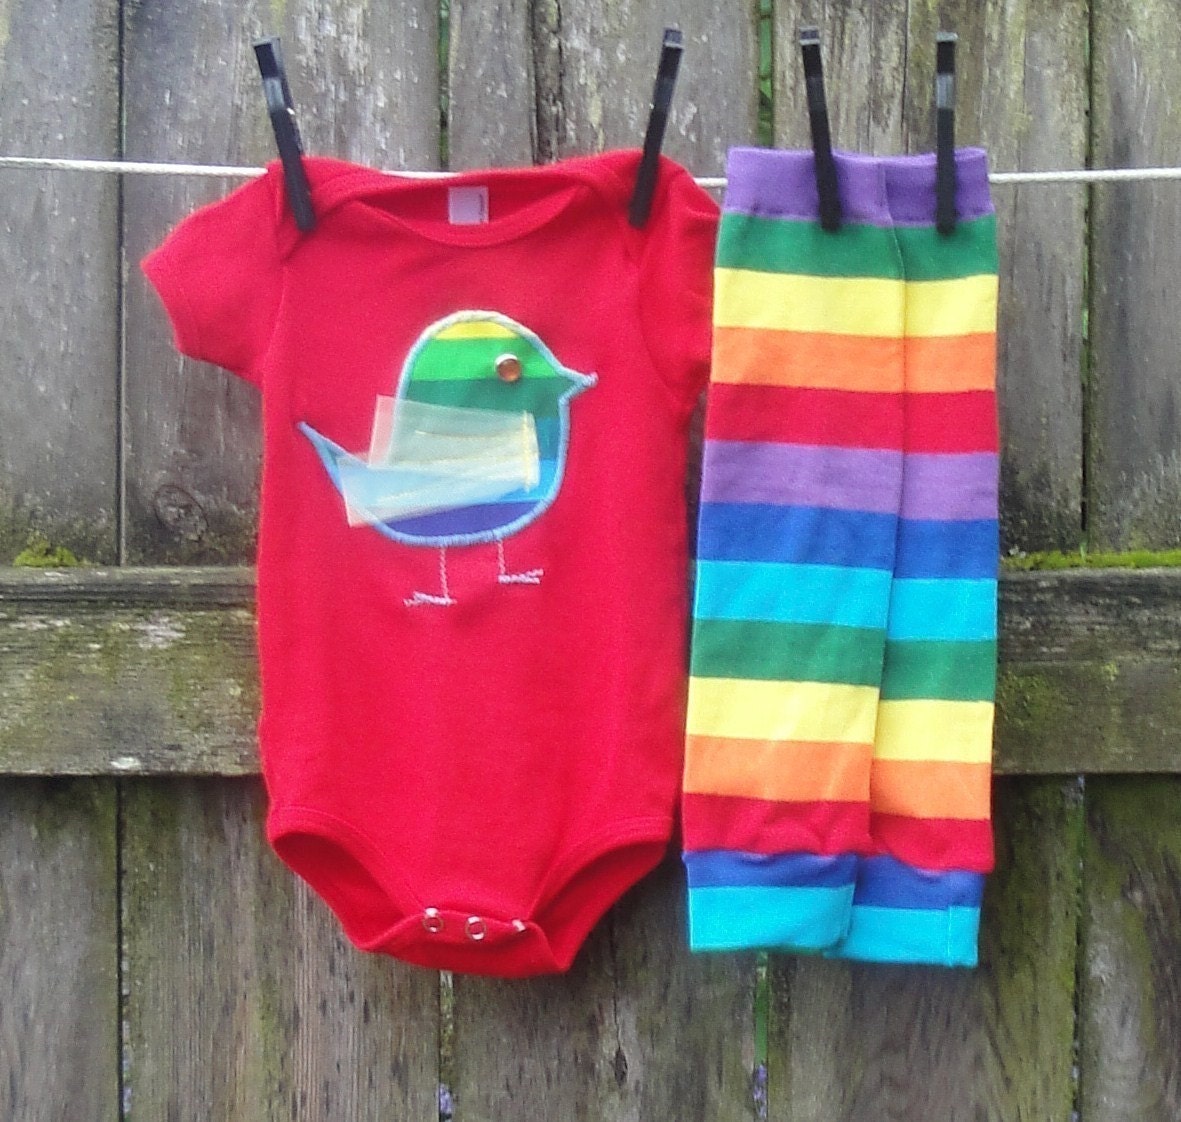 RAINBOW CHIC-A-DEE--2 piece Bird Applique Onesie and Kool Kid Legs Combo--Red, White or Black-Long or Short Sleeve-3/6,6/12,12/18,18/24 mos